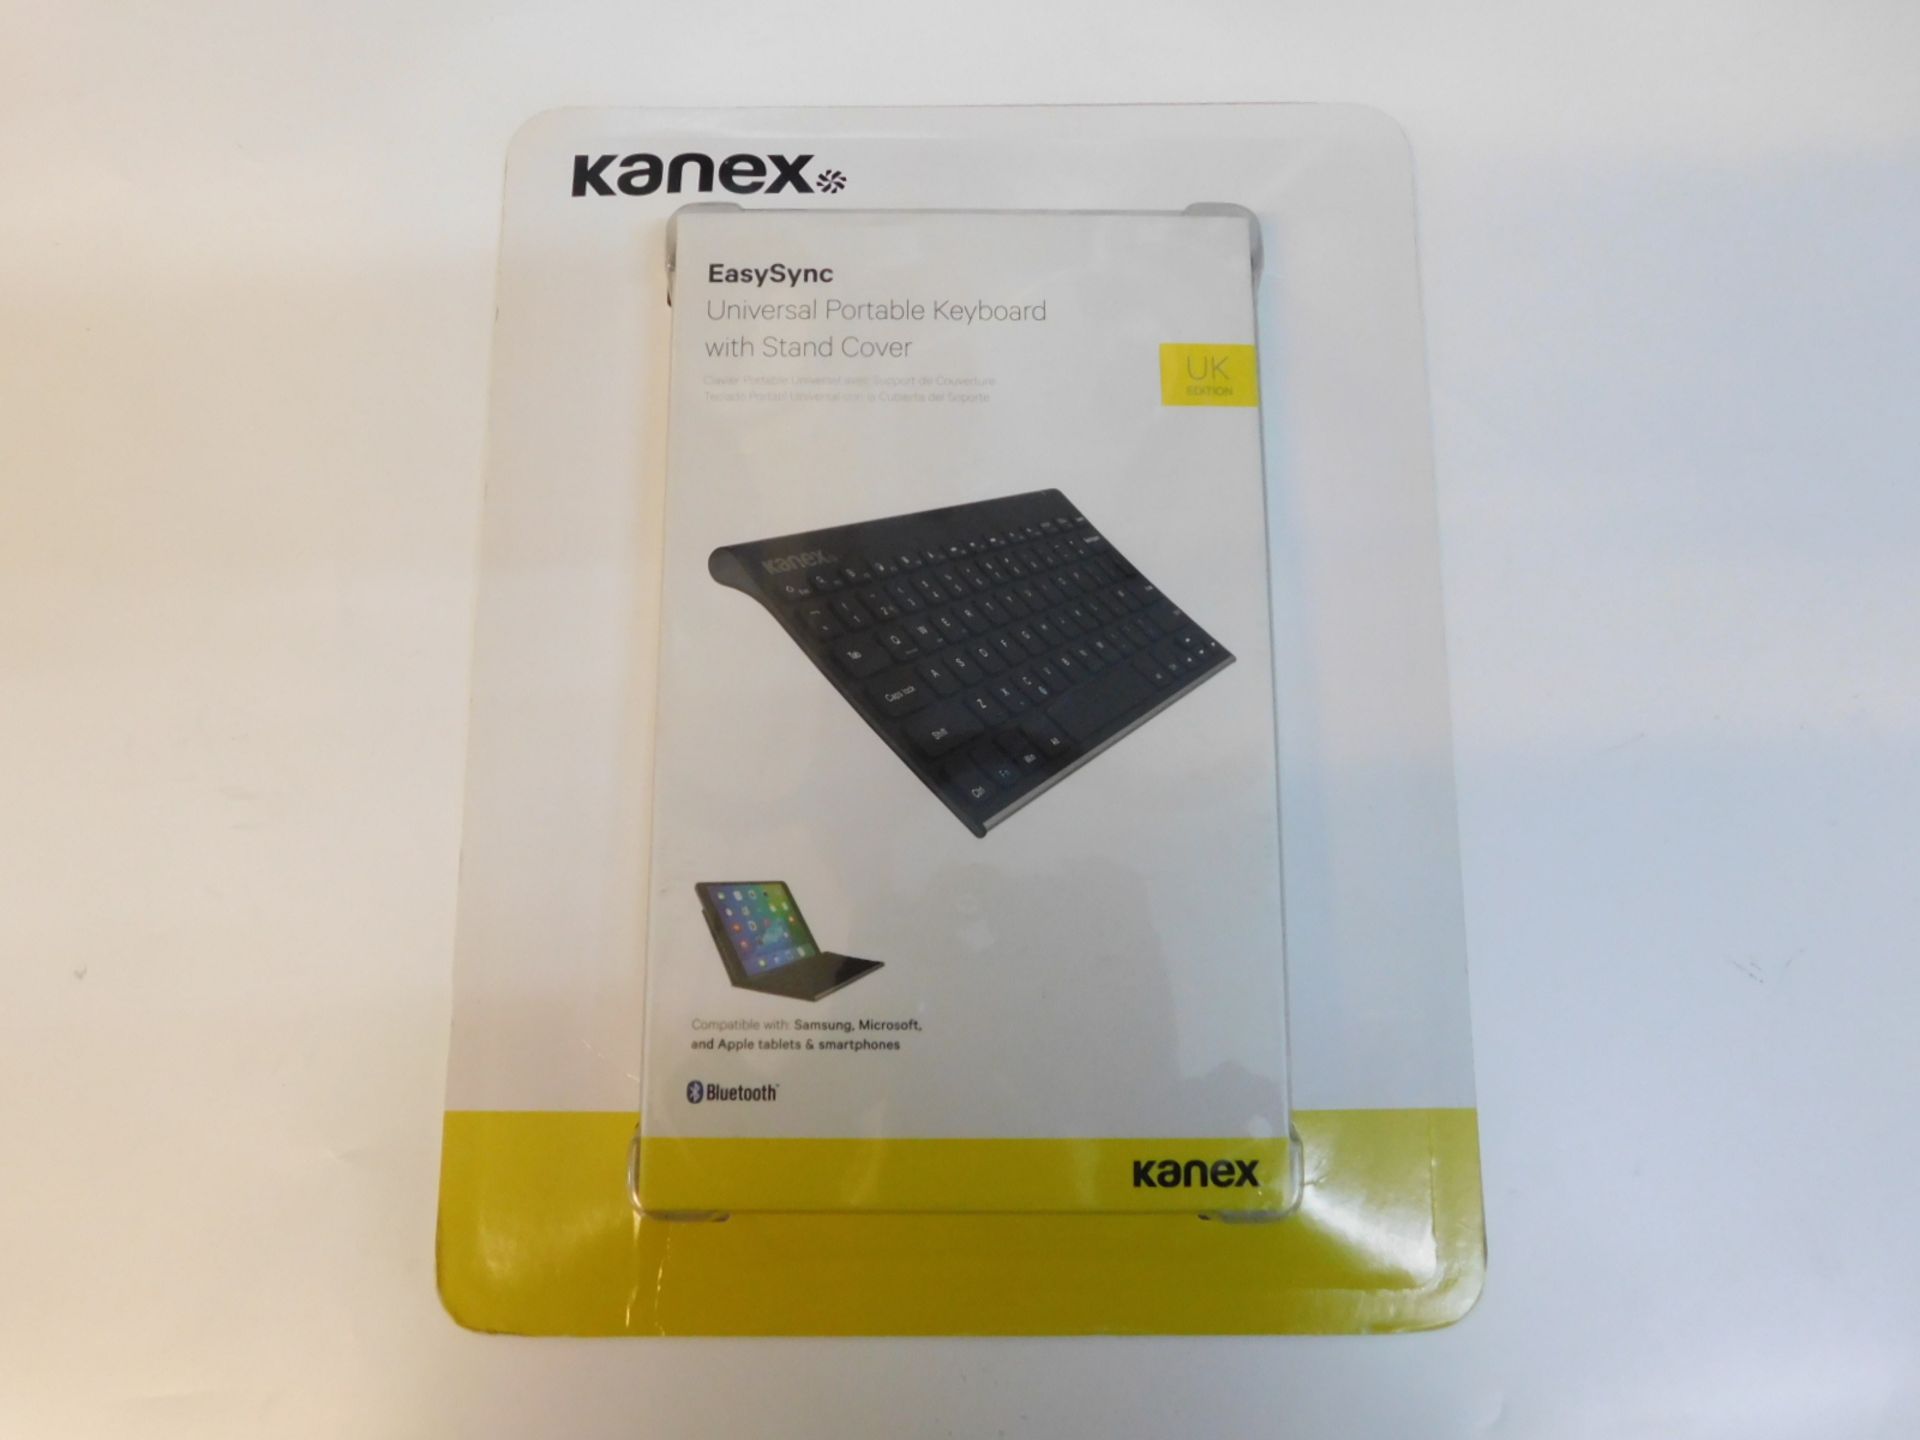 1 BRAND NEW PACK OF KANEX EASY SYNC UNIVERSAL PORTABLE KEYBOARD WITH COVER RRP Â£49.99